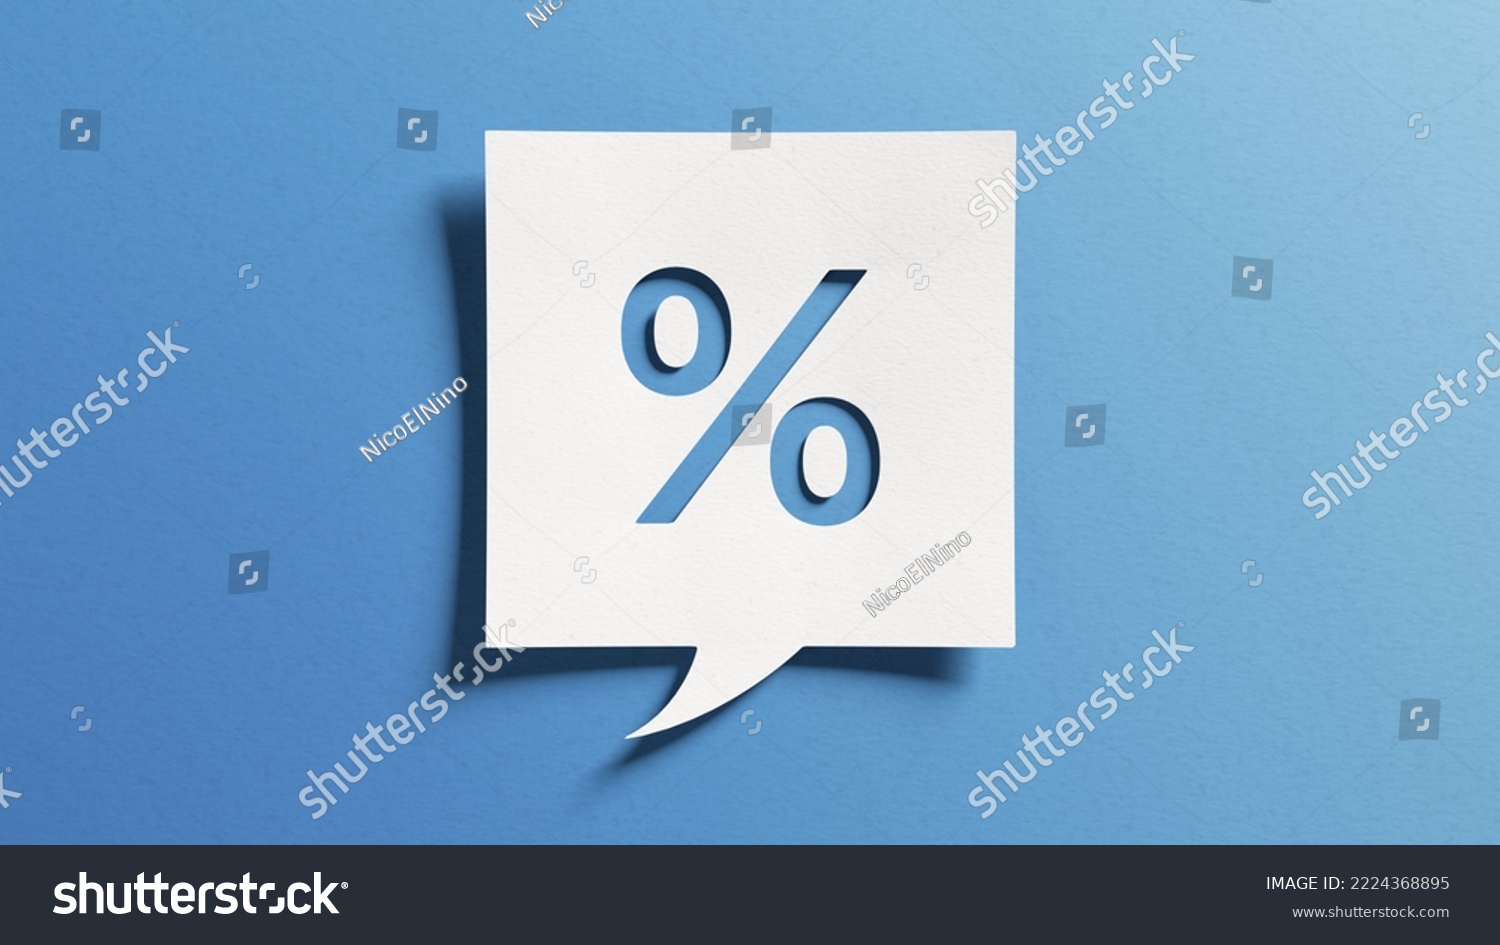 Percent sign for finance, return on investment (ROI), credit, mortgage, banking, tax, marketing, discount or promotion concepts. Percentage symbol. White cutout paper on blue background. #2224368895